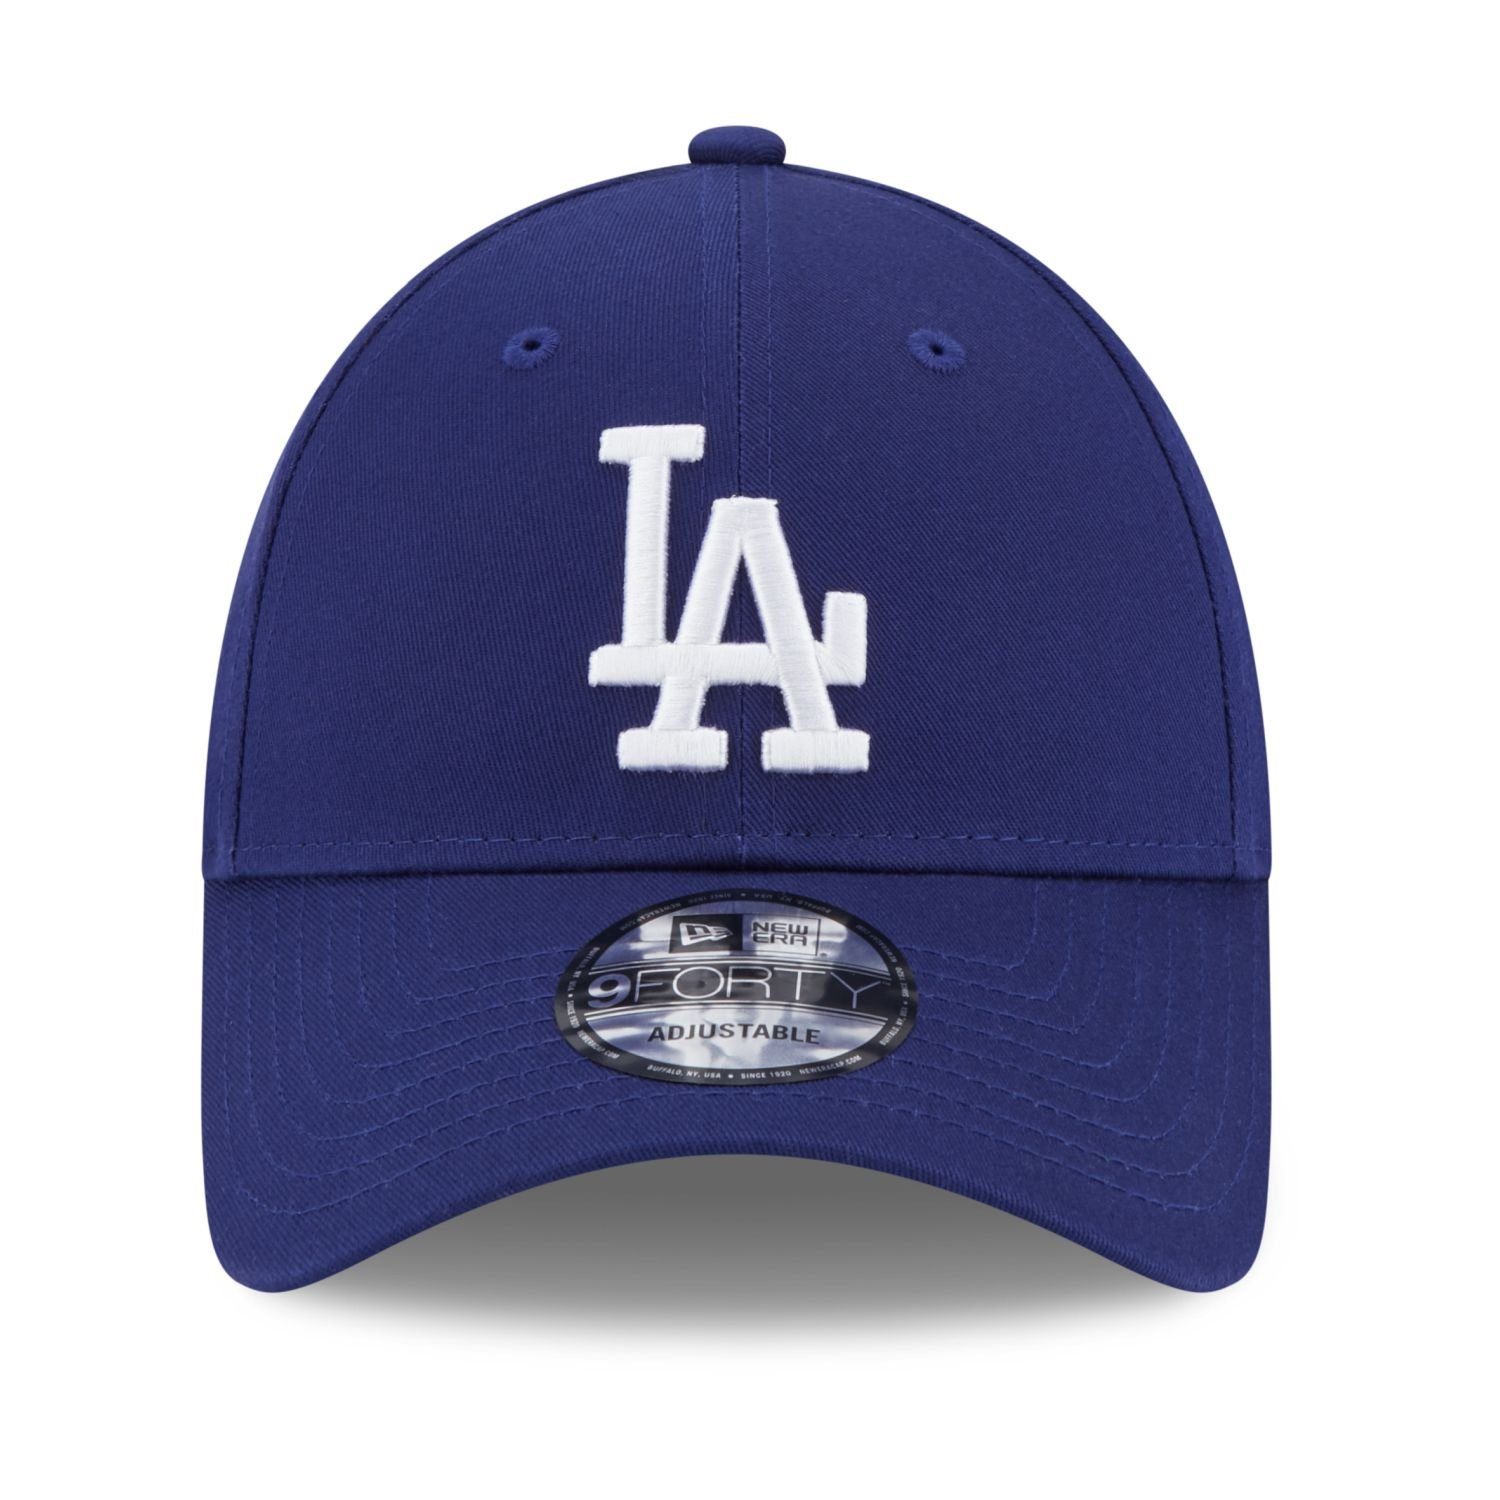 SIDEPATCH Los Angeles Baseball Cap Dodgers Strapback Era New 9Forty